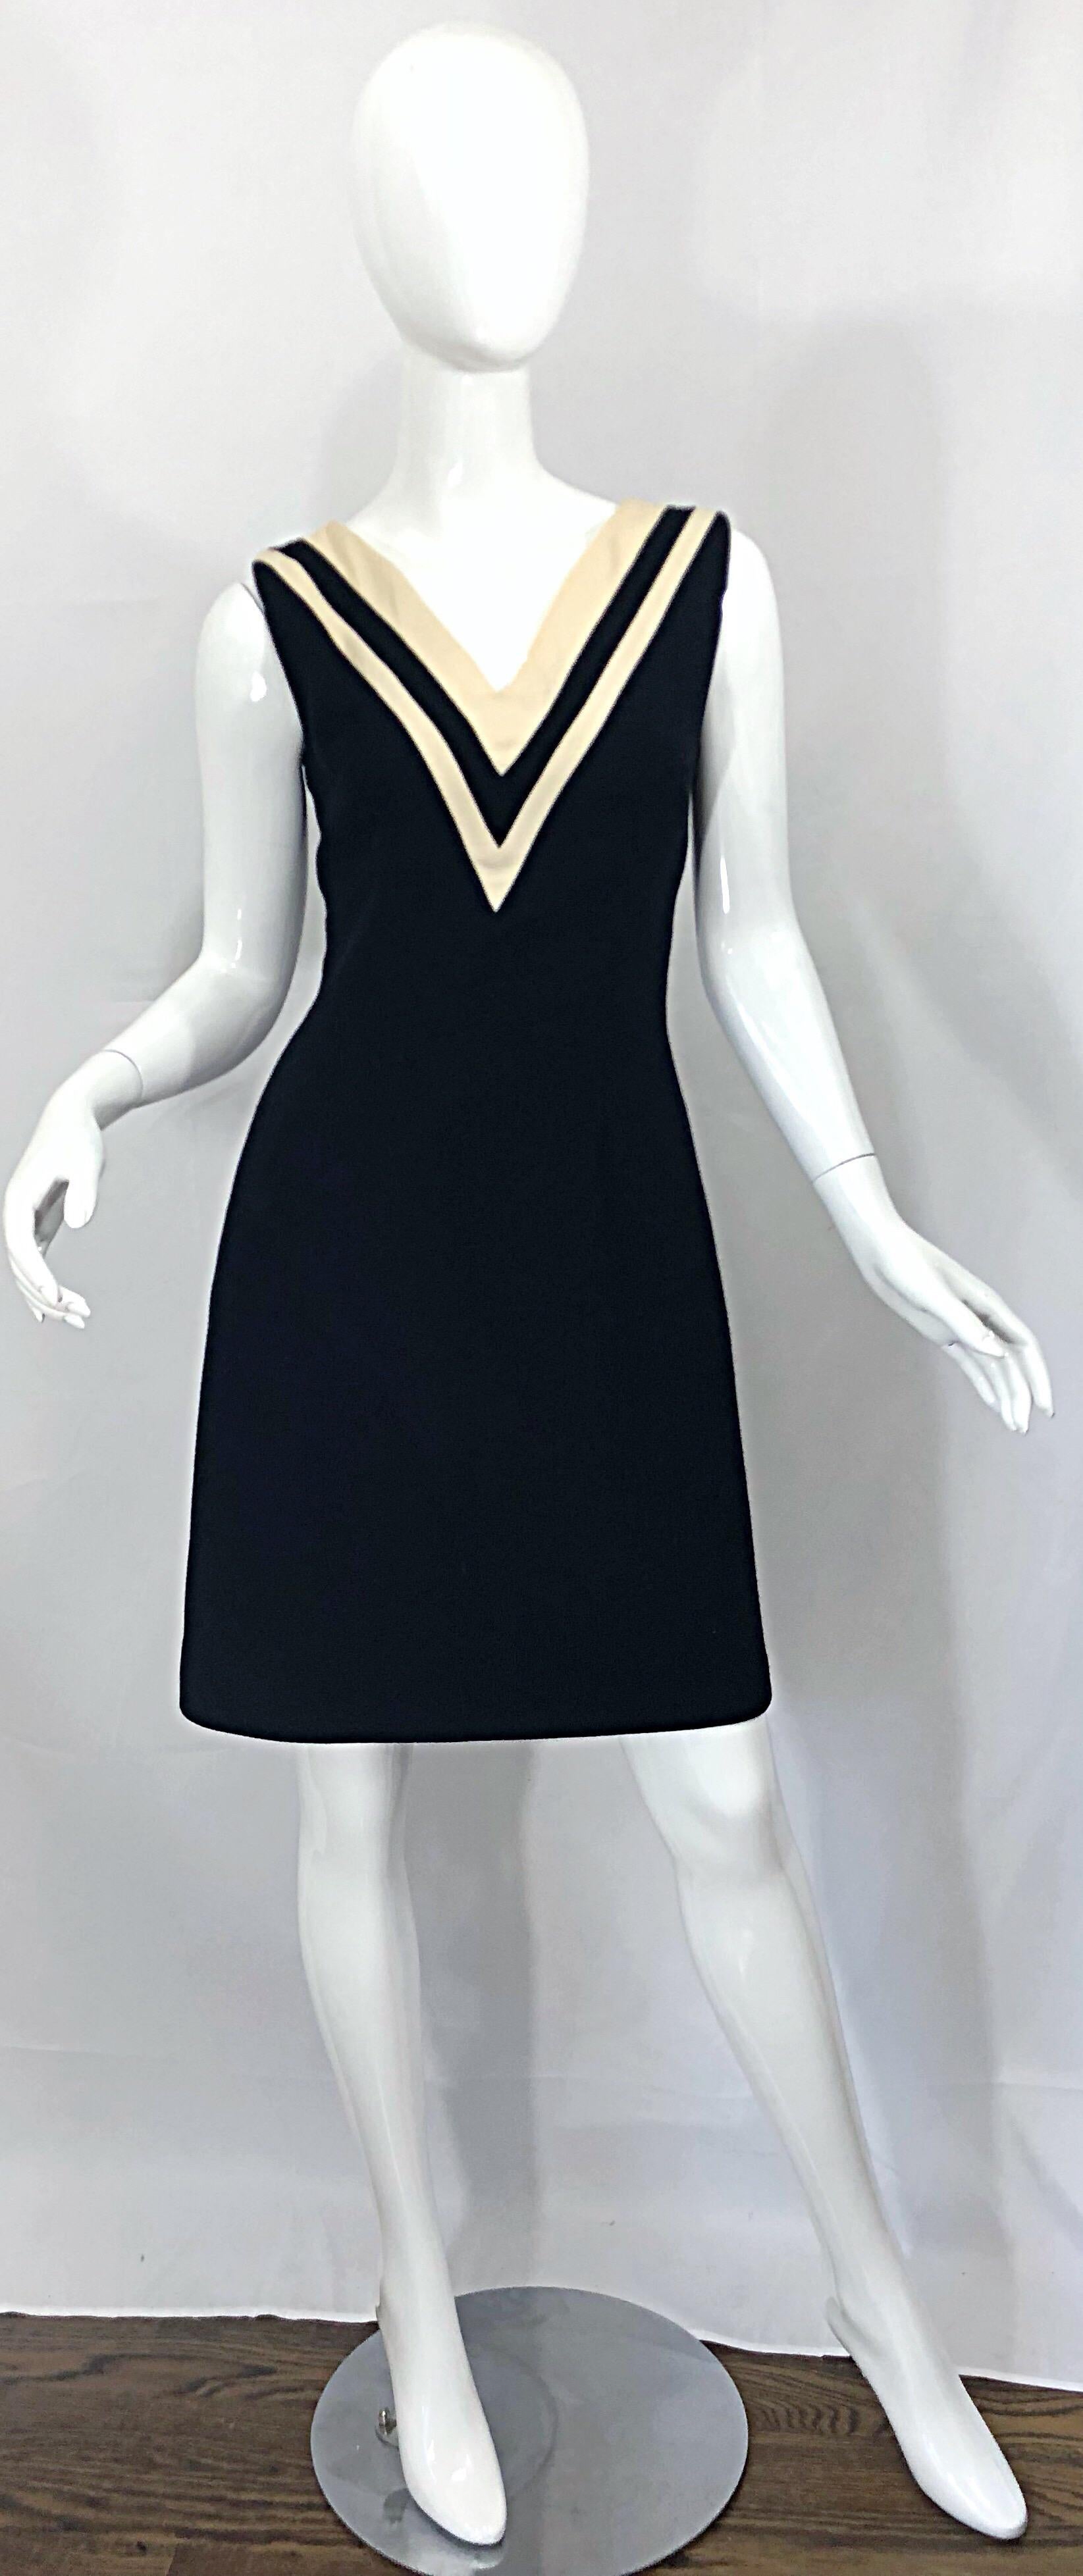 Classic vintage 90s DOLCE & GABBANA black and ivory white virgin wool shift dress! Features a super soft virgin wool with a silk lining. Fitted bodice with a forgiving flattering skirt. The perfect little black dress with just the right amount of